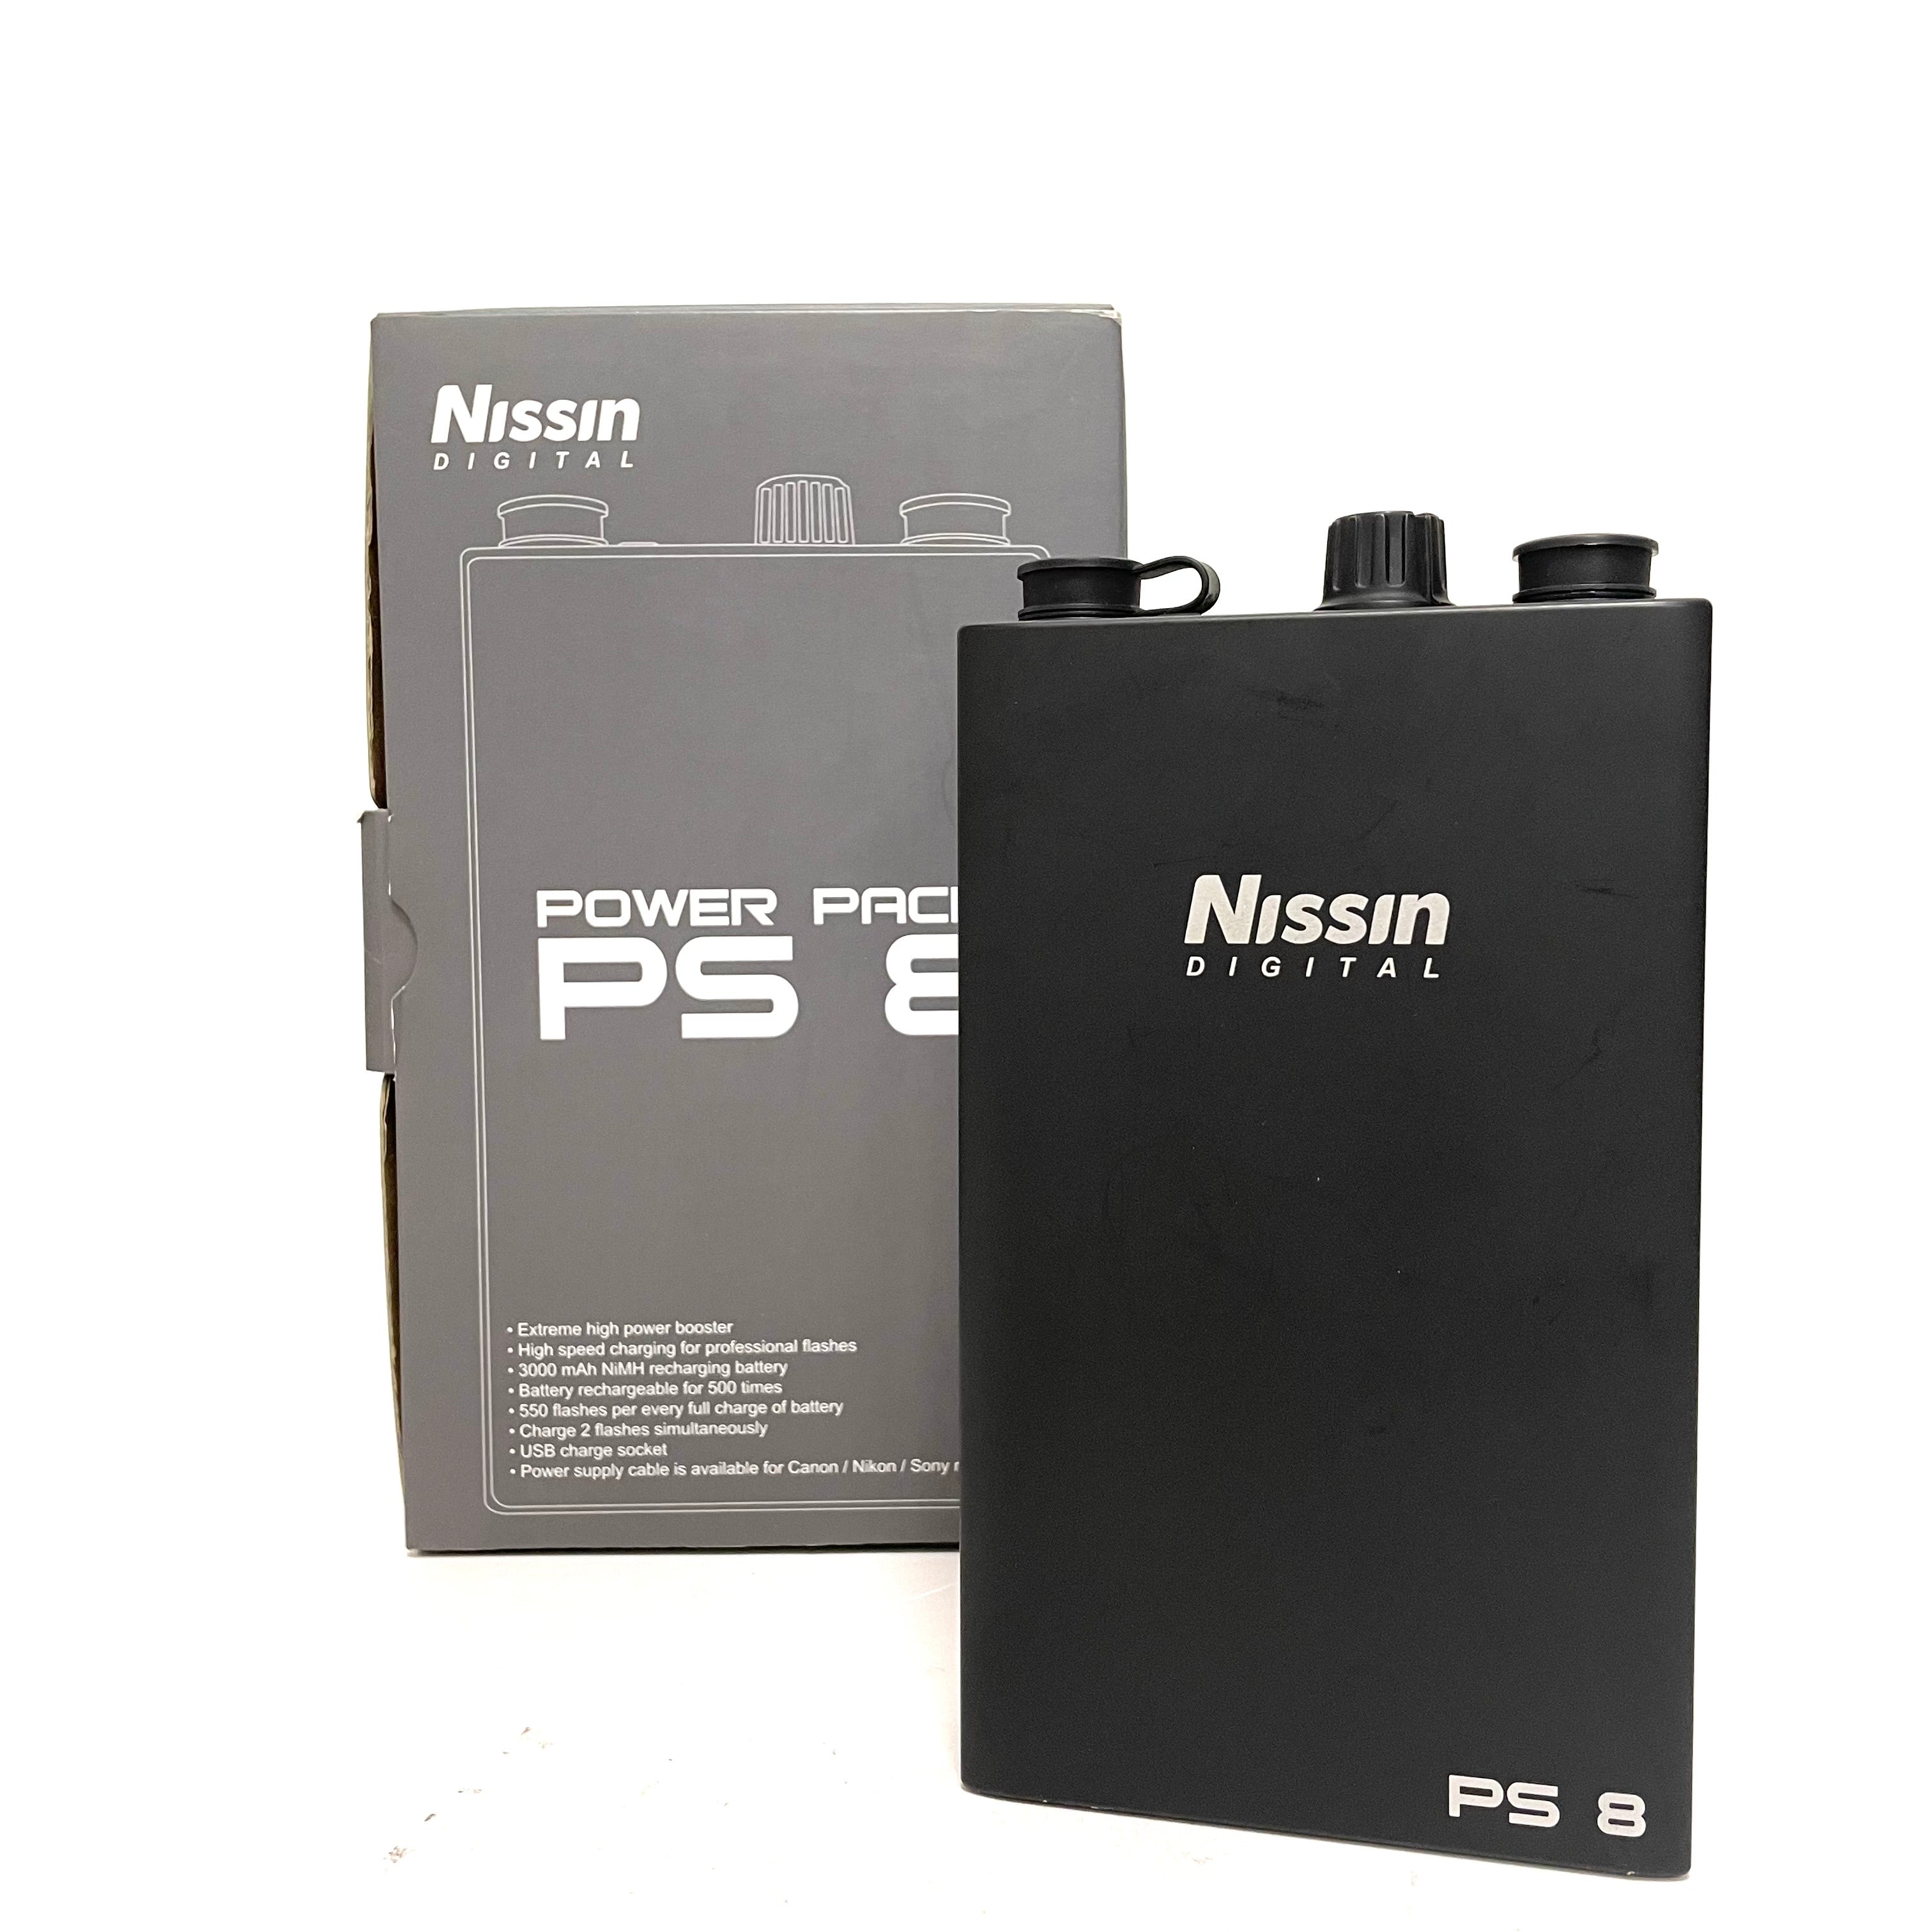 Nissin Digital Power Pack PS 8 x Canon usato